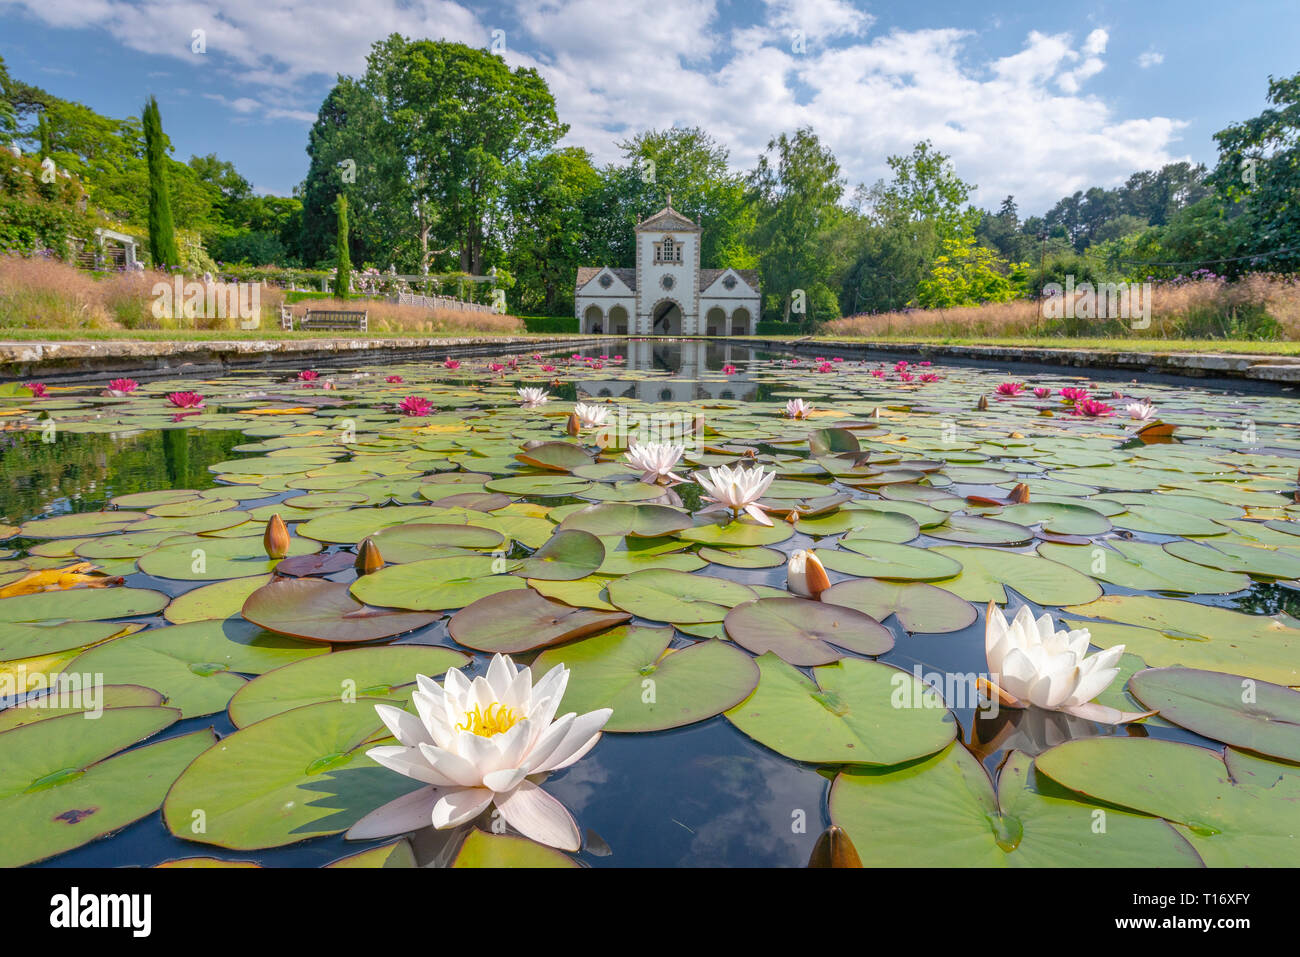 Pin Mill reflecting on a pond adorned with water lilies, Bodnant garden, Conwy, Wales, United Kingdom Stock Photo